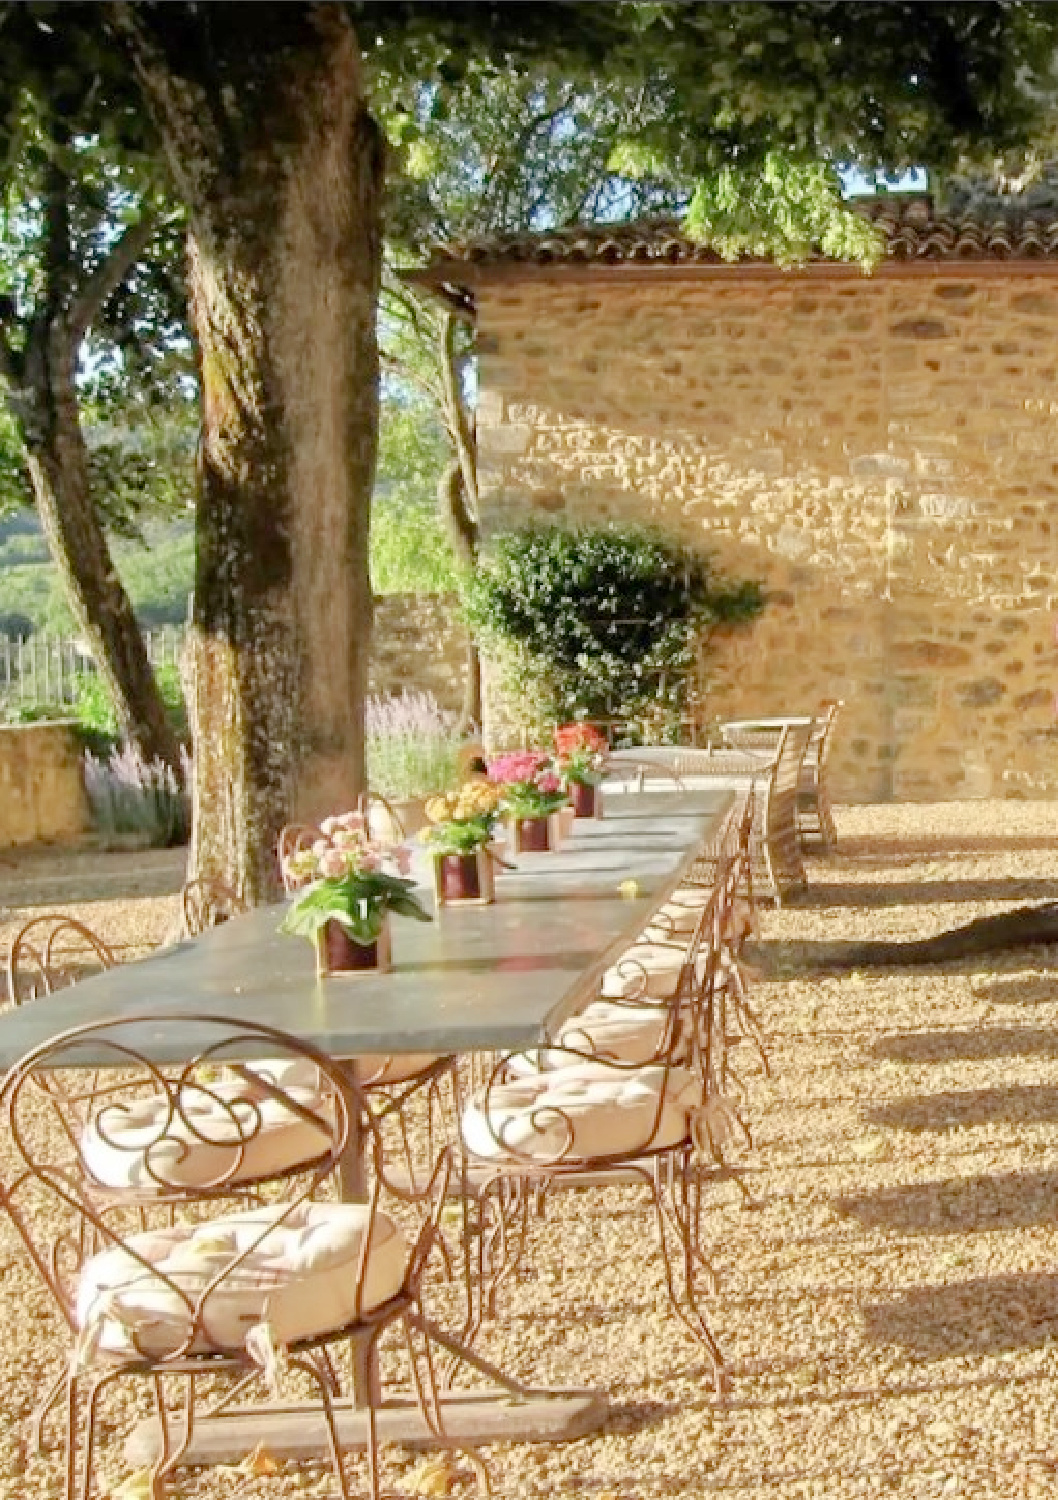 Beautiful renovated Provence French Chateau Gignac - @chateauinfrance. #frenchchateau #chateaugignac #provencestyle #frenchcountry #oldworldstyle